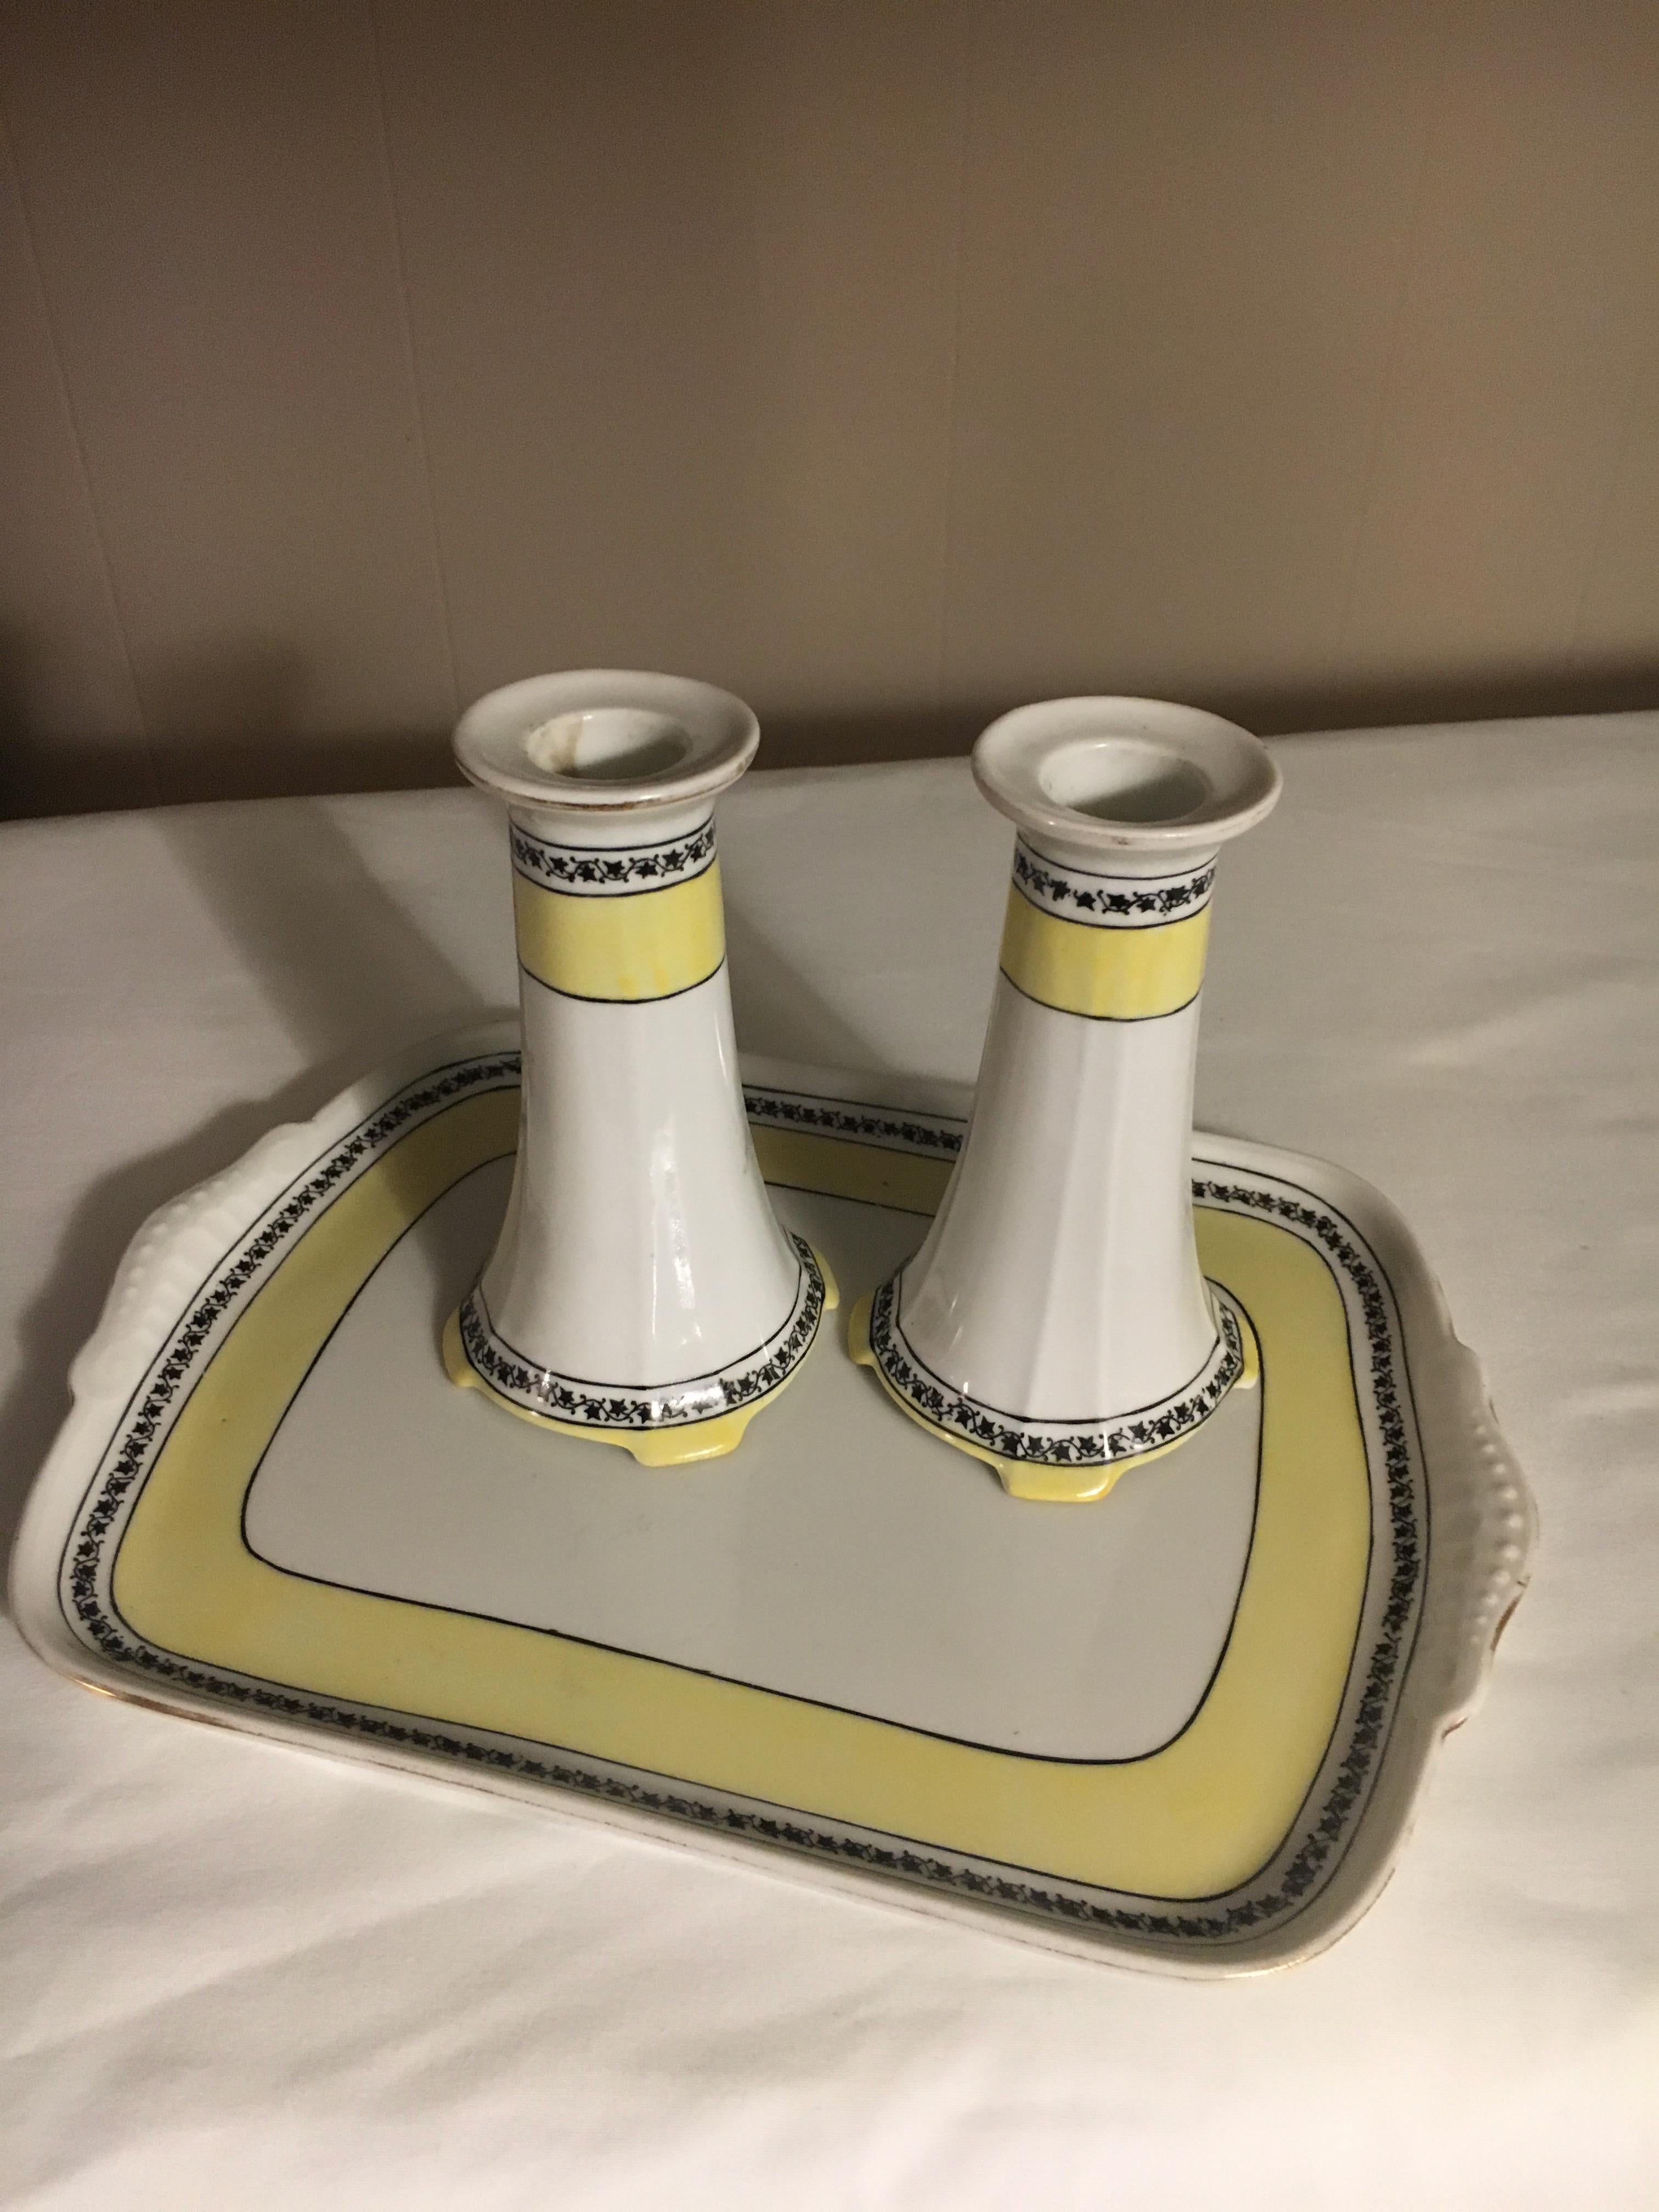 Union Bavaria Porcelain Tray and Candlesticks For Sale 6